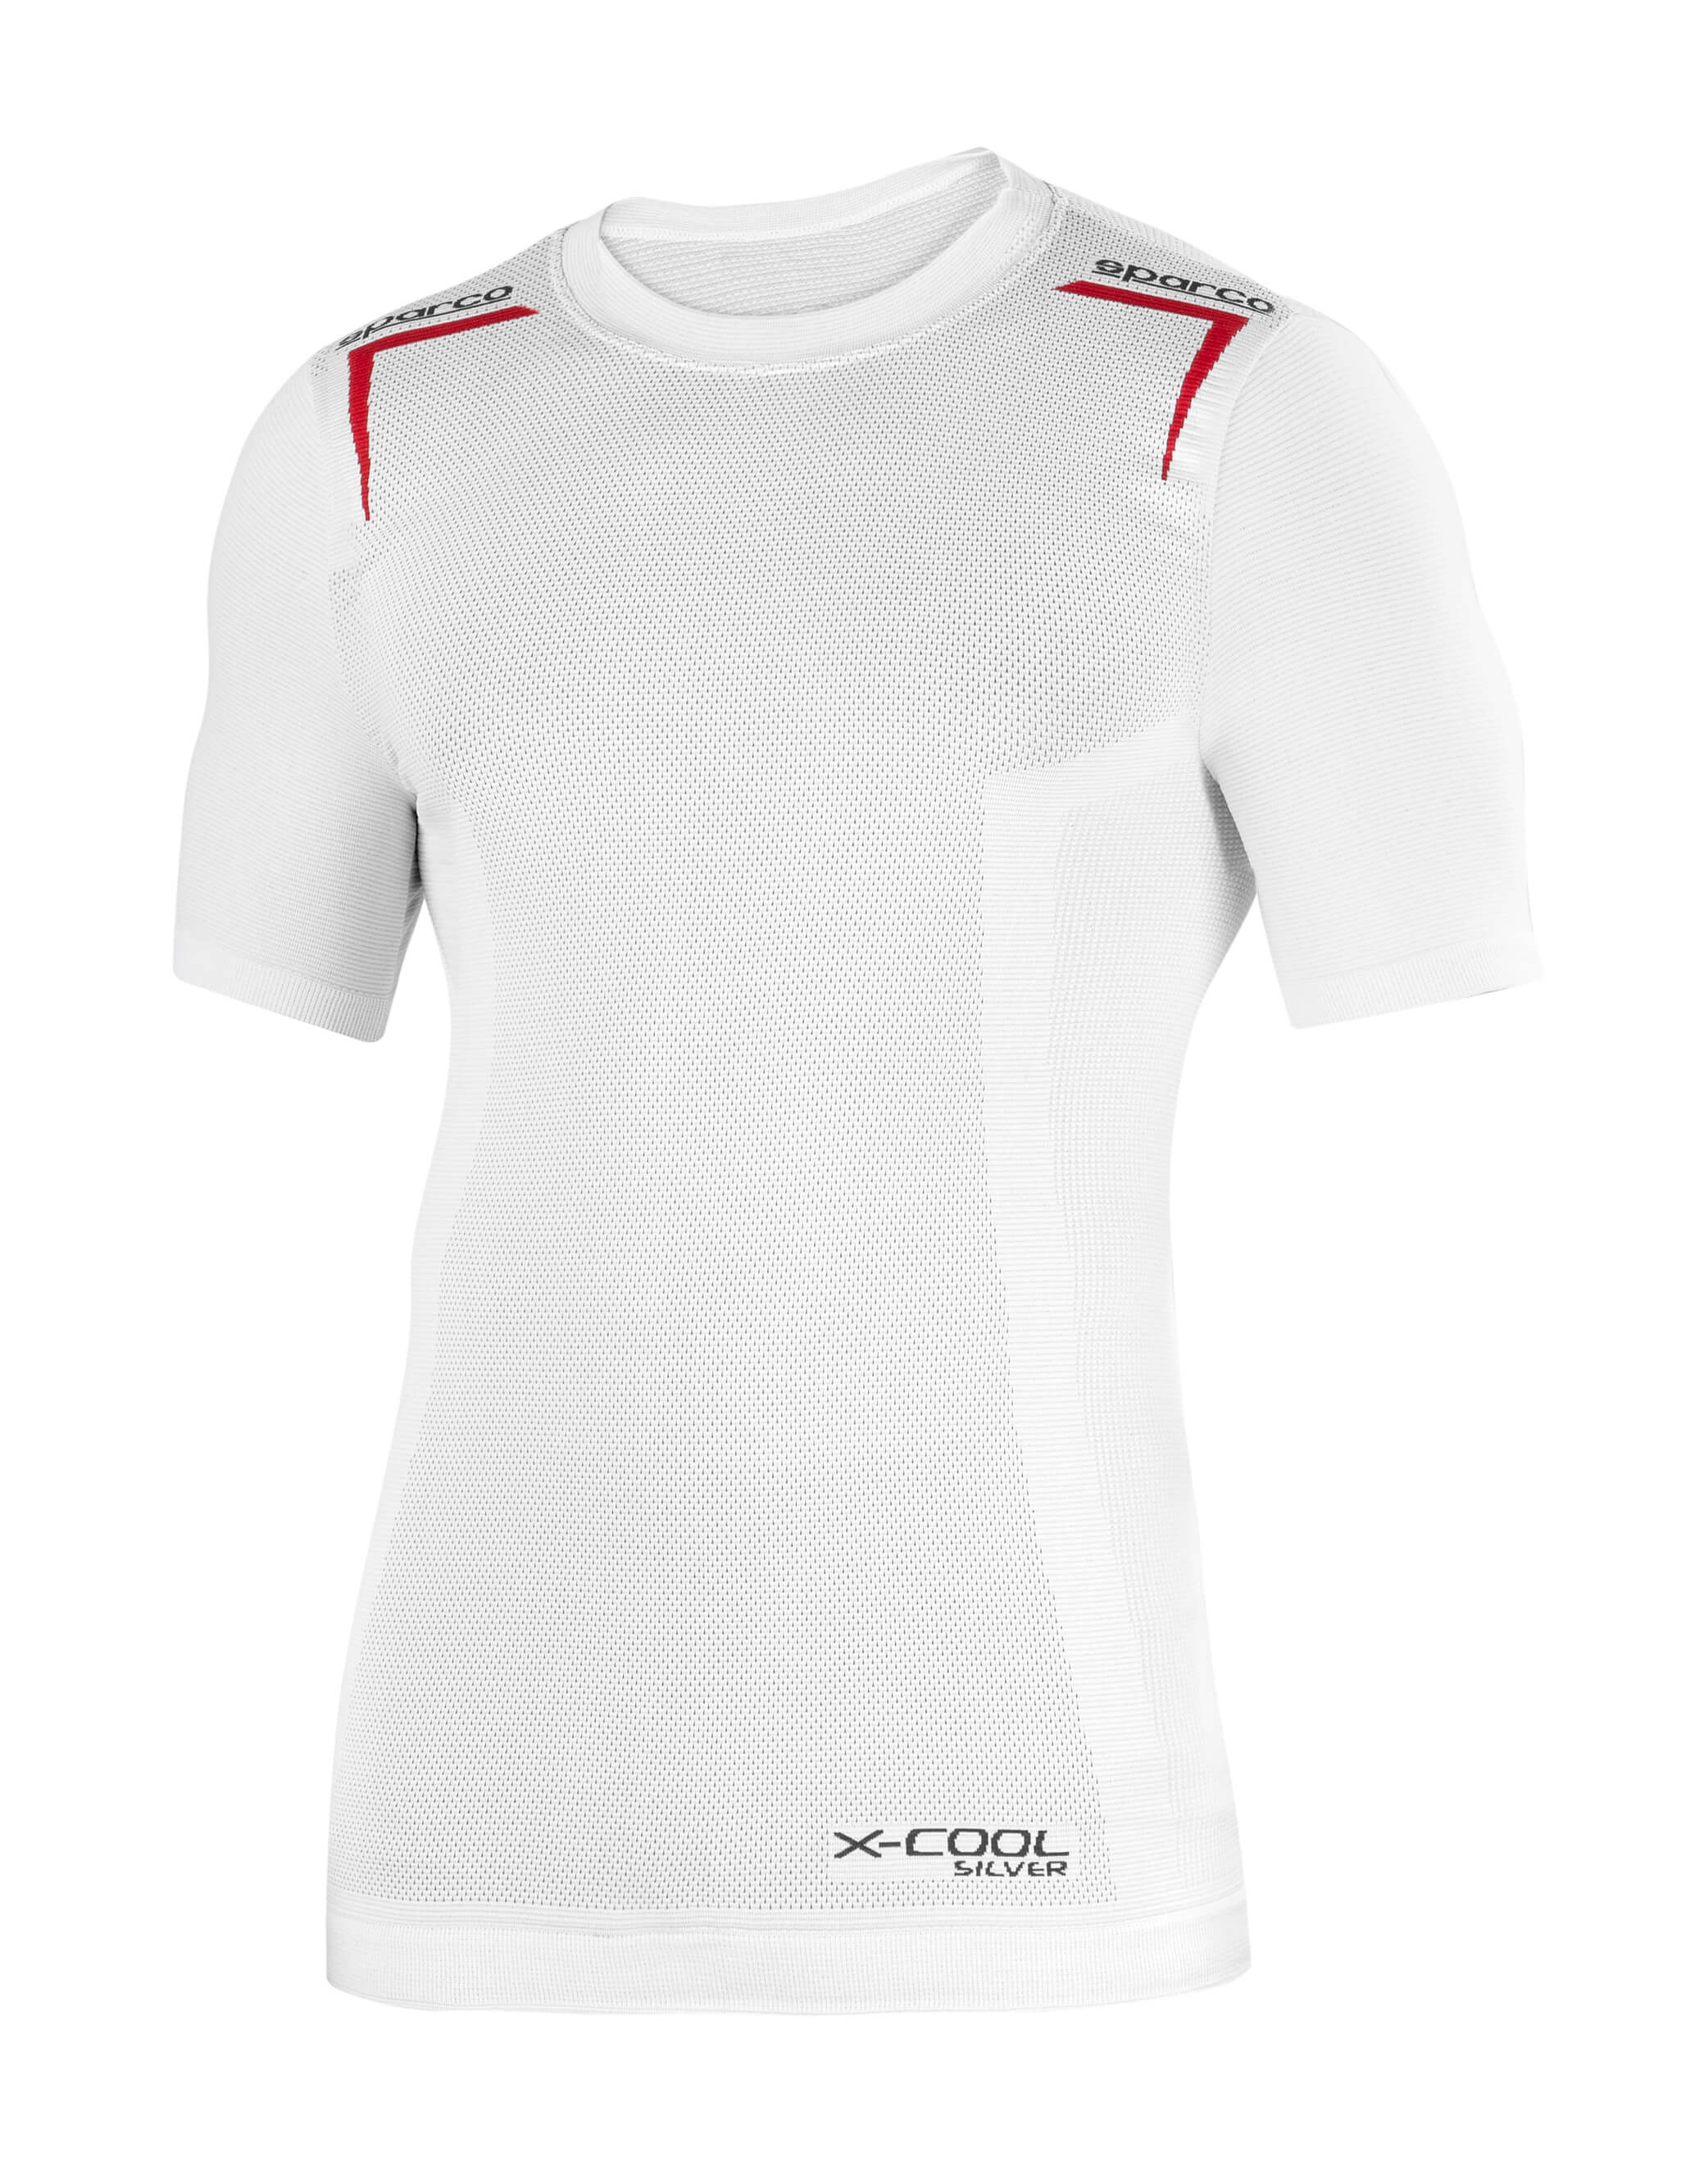 Picture of Sparco T-Shirt K-Carbon weiß/rot